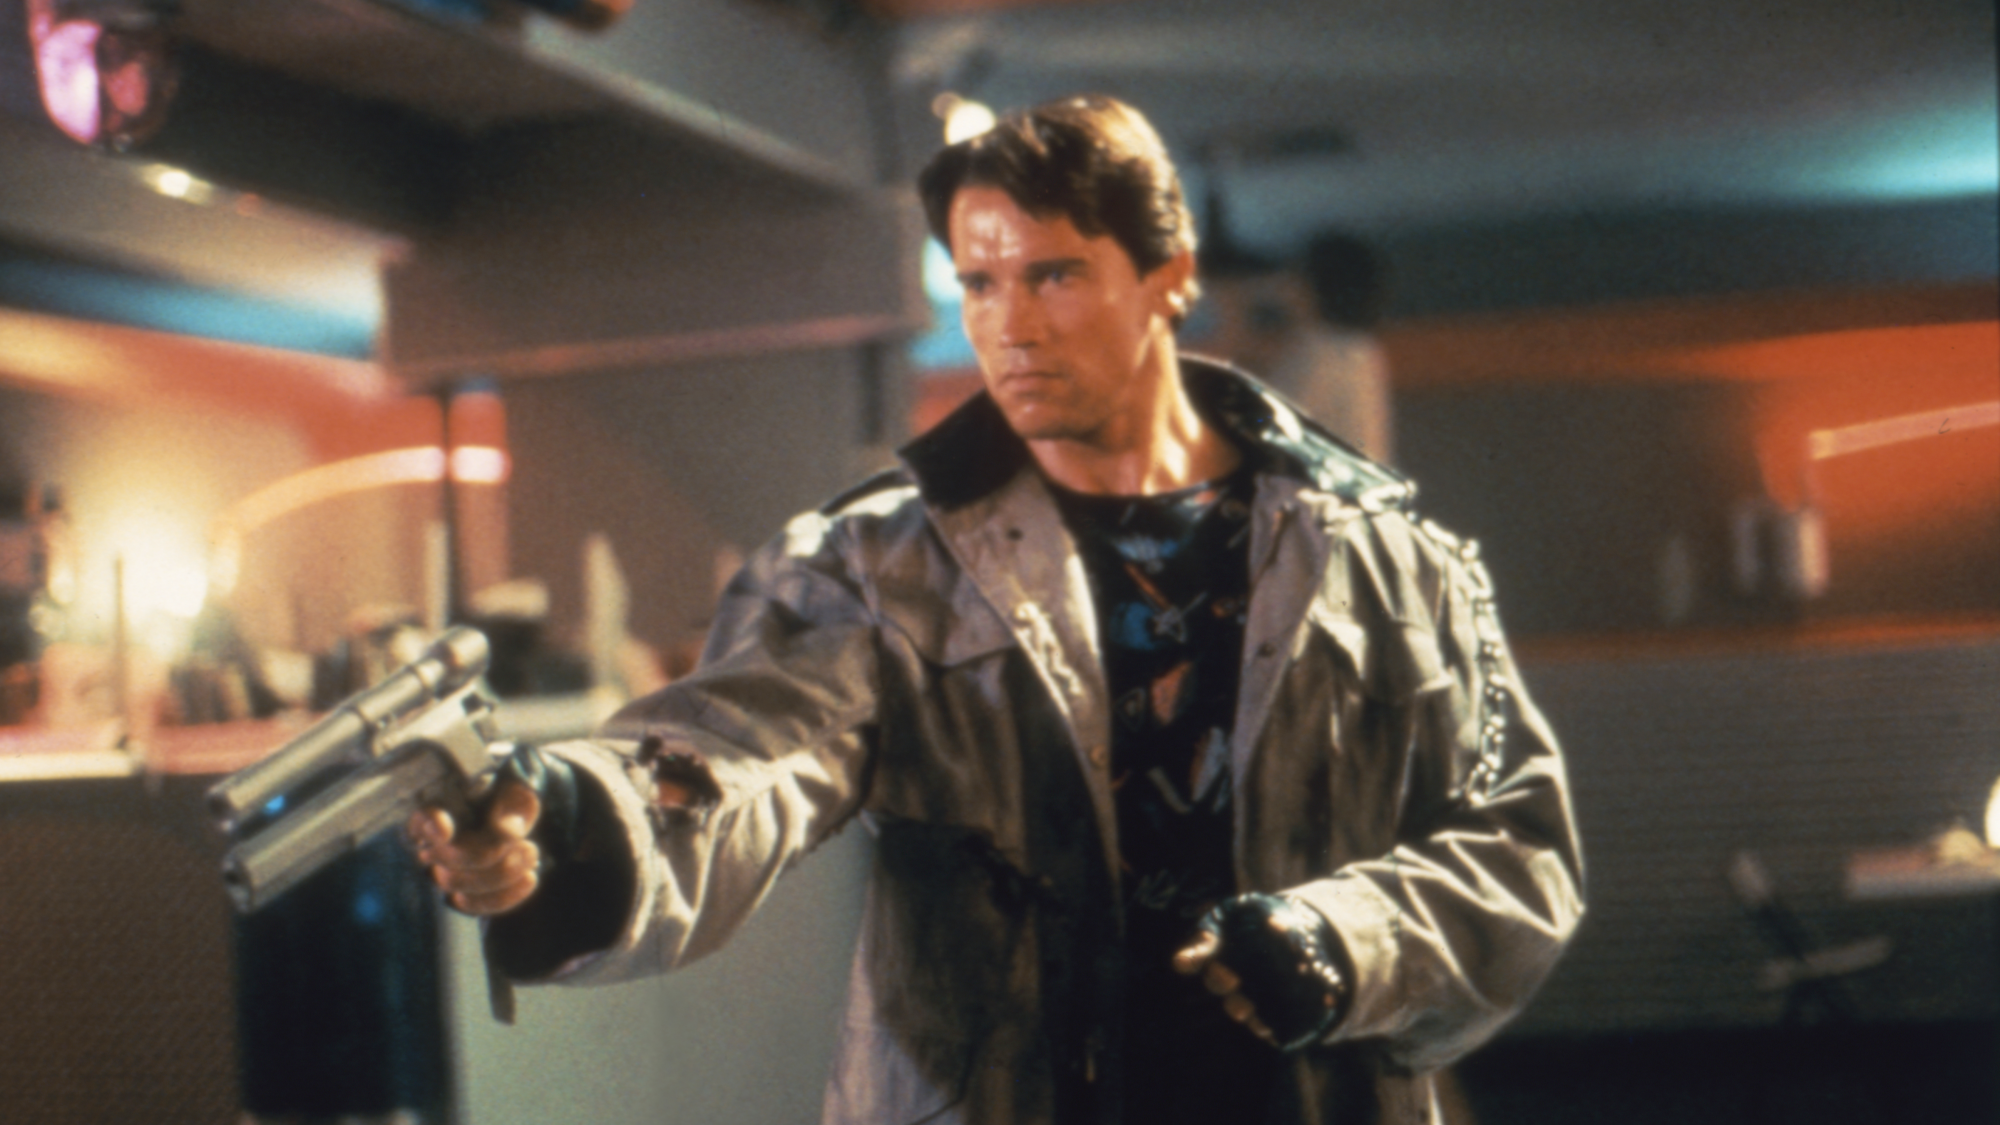 A man in a leather jacket points a gun.